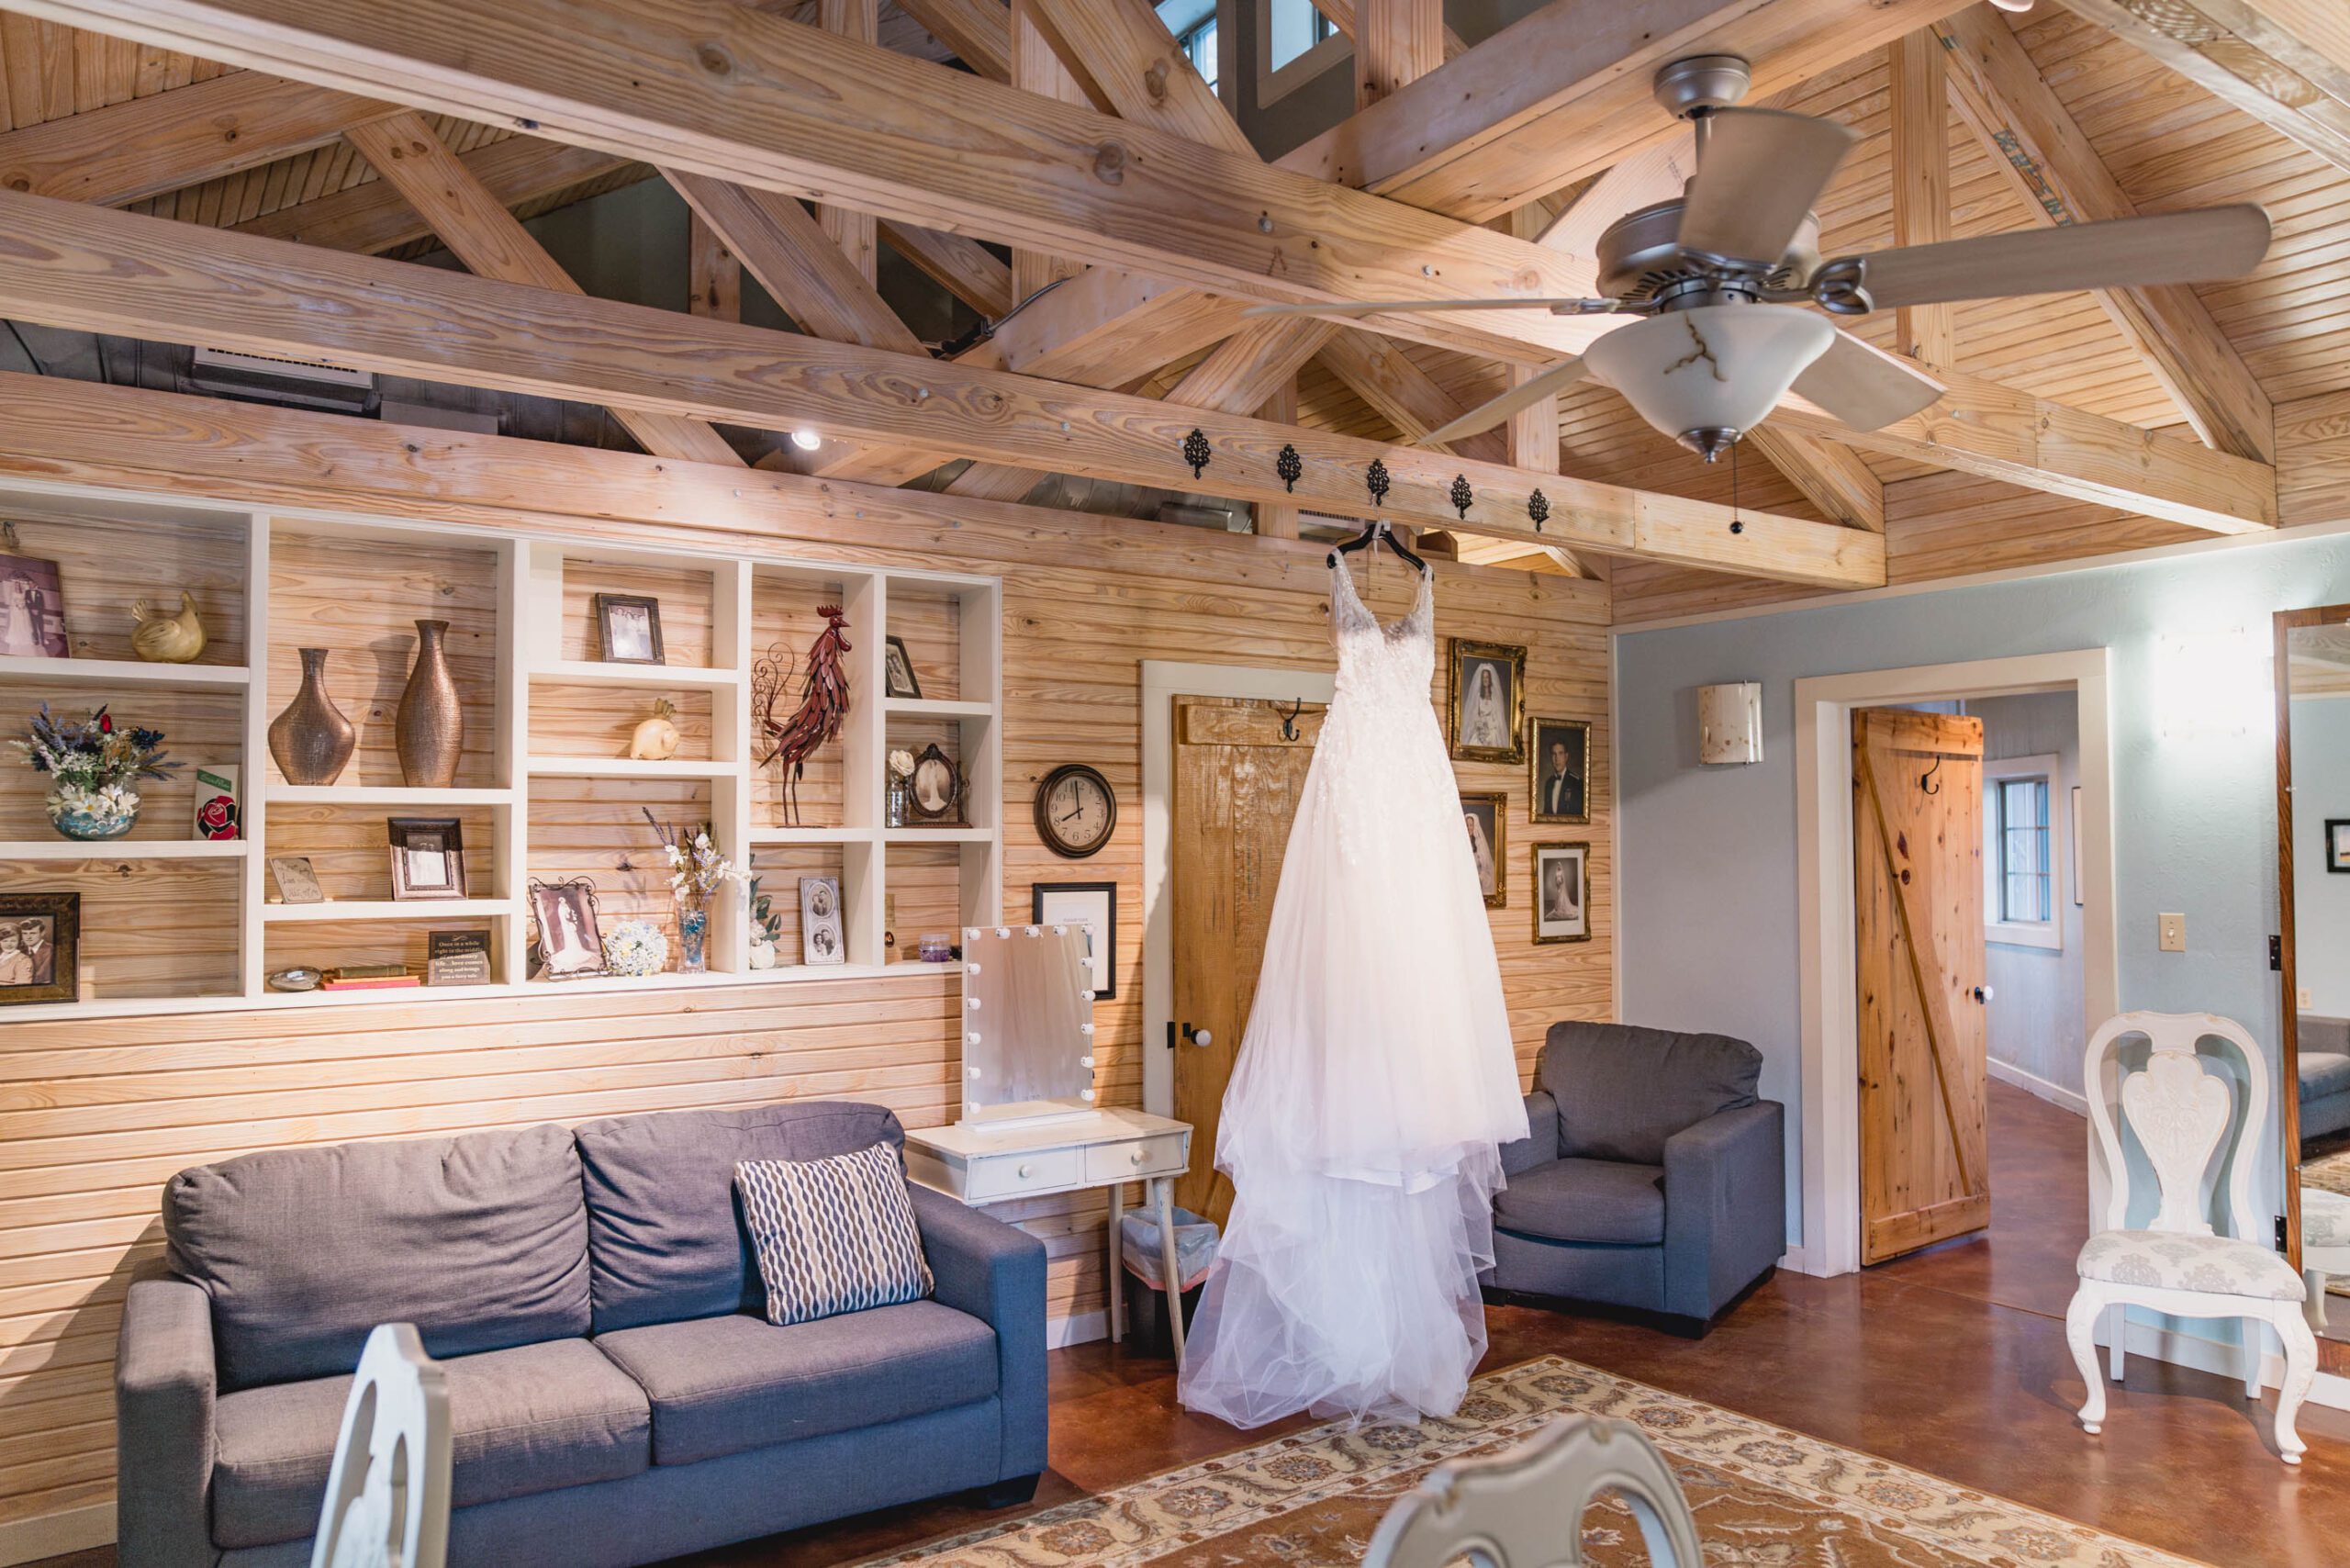 Brides Room at Hollow Hill Event Center Wedding and Event Venue, Weatherford, Texas. Room with pine walls and ceiling, sofa, chair, and vanity table. Wedding dress handing from rafter.